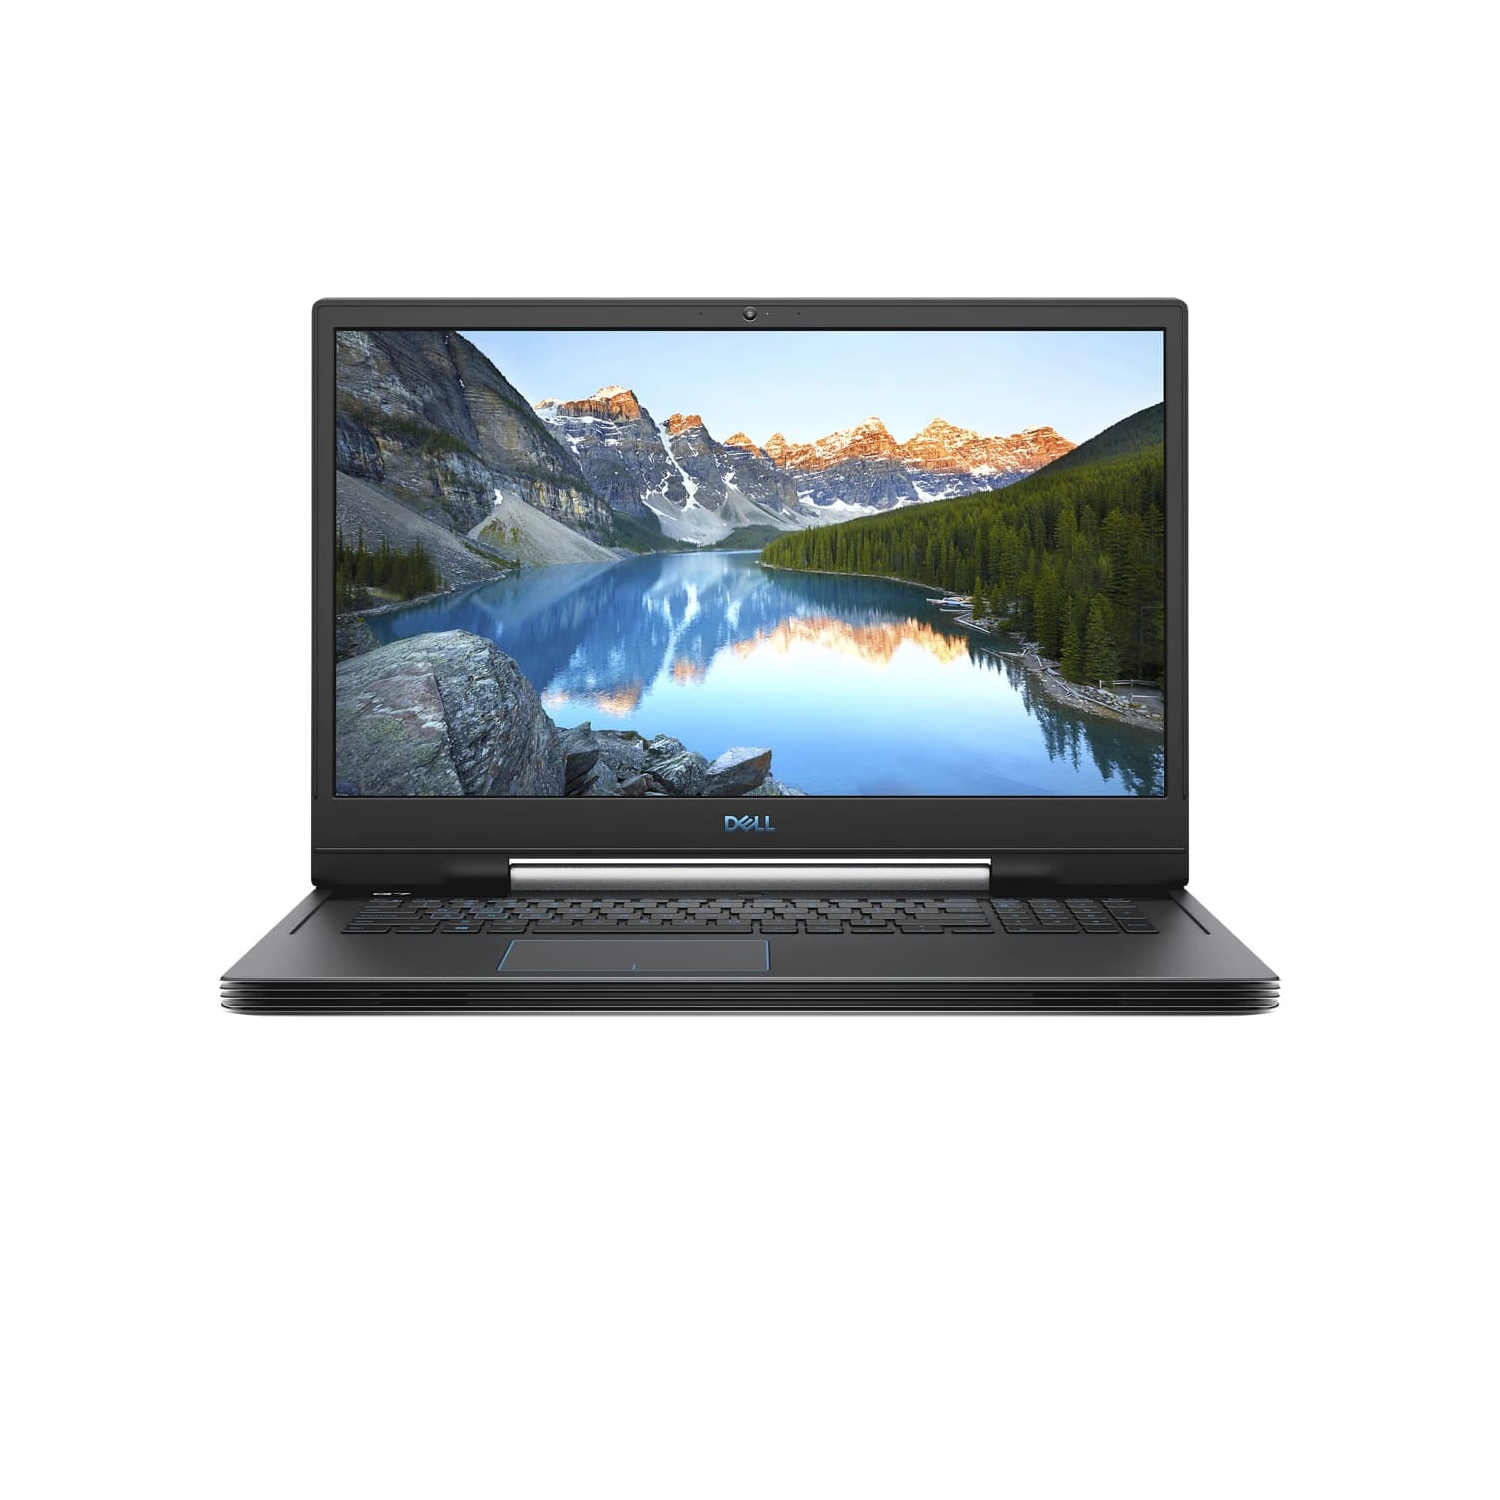 Refurbished (Excellent) – Dell G7 7790 Gaming Laptop (2019) | 17.3" FHD | Core i7 - 256GB SSD - 8GB RAM - RTX 2060 | 6 Cores @ 4.5 GHz - 6GB GDDR6